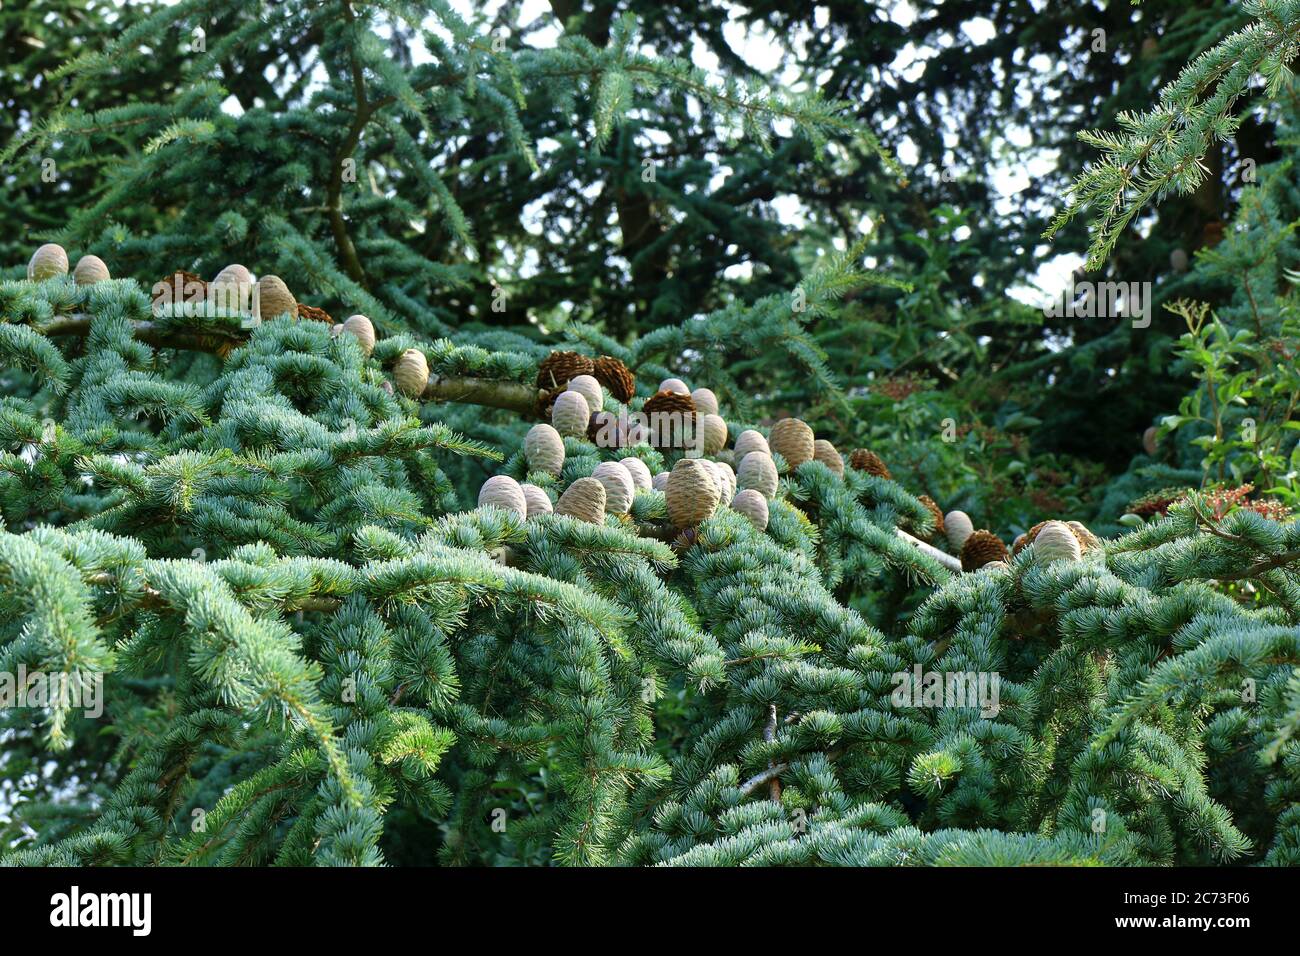 A view of the  Cones of the cedar tree Stock Photo